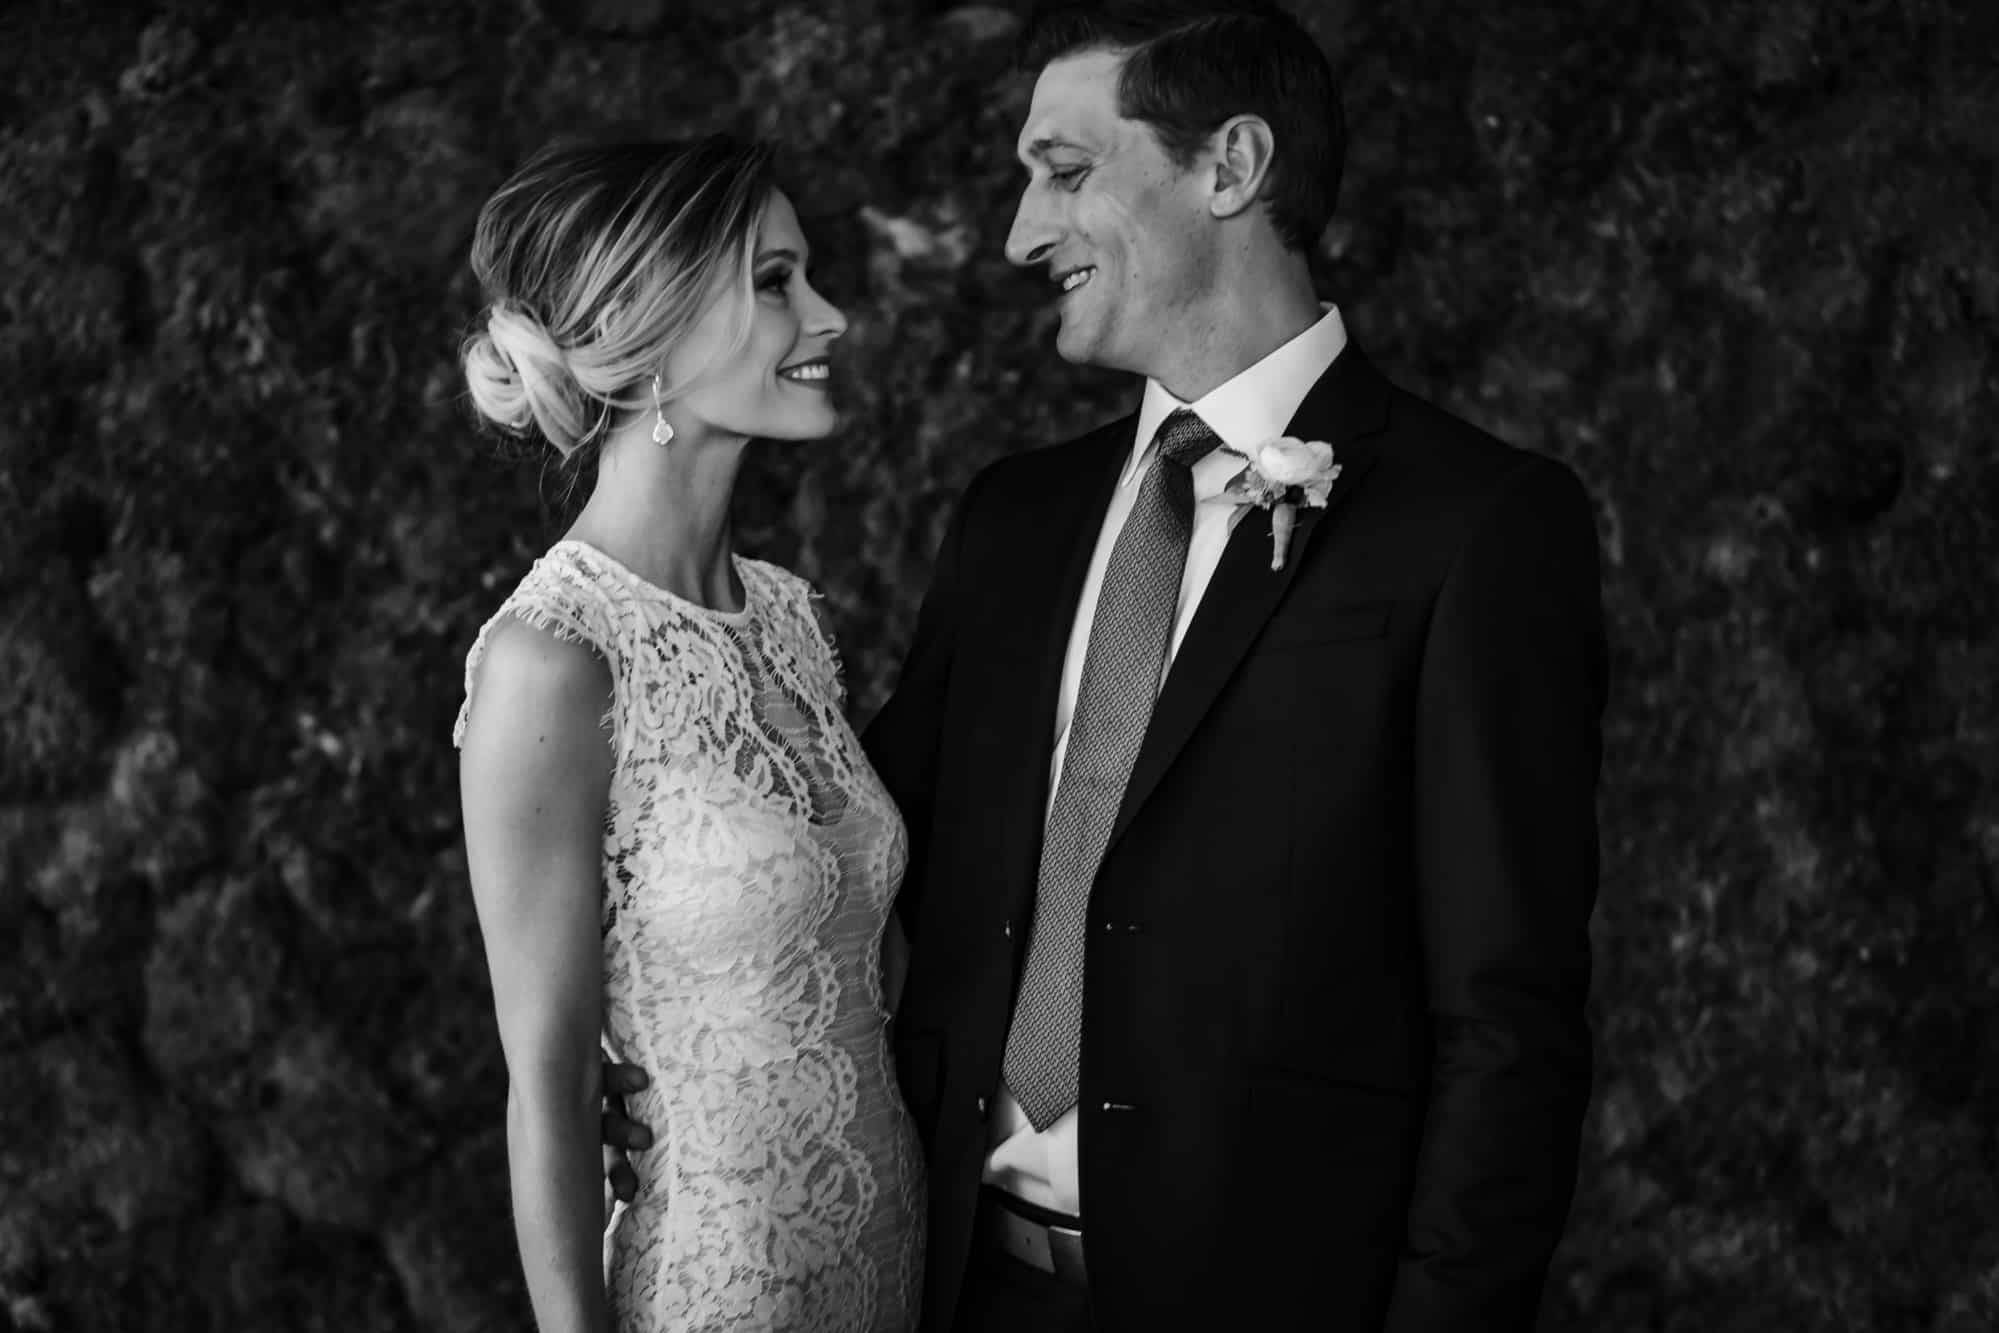 black and white photos, bride and groom, black and white portraits, elegant bride and groom, low bun hair bride, lace gown bride, chantilly lace bridal gown